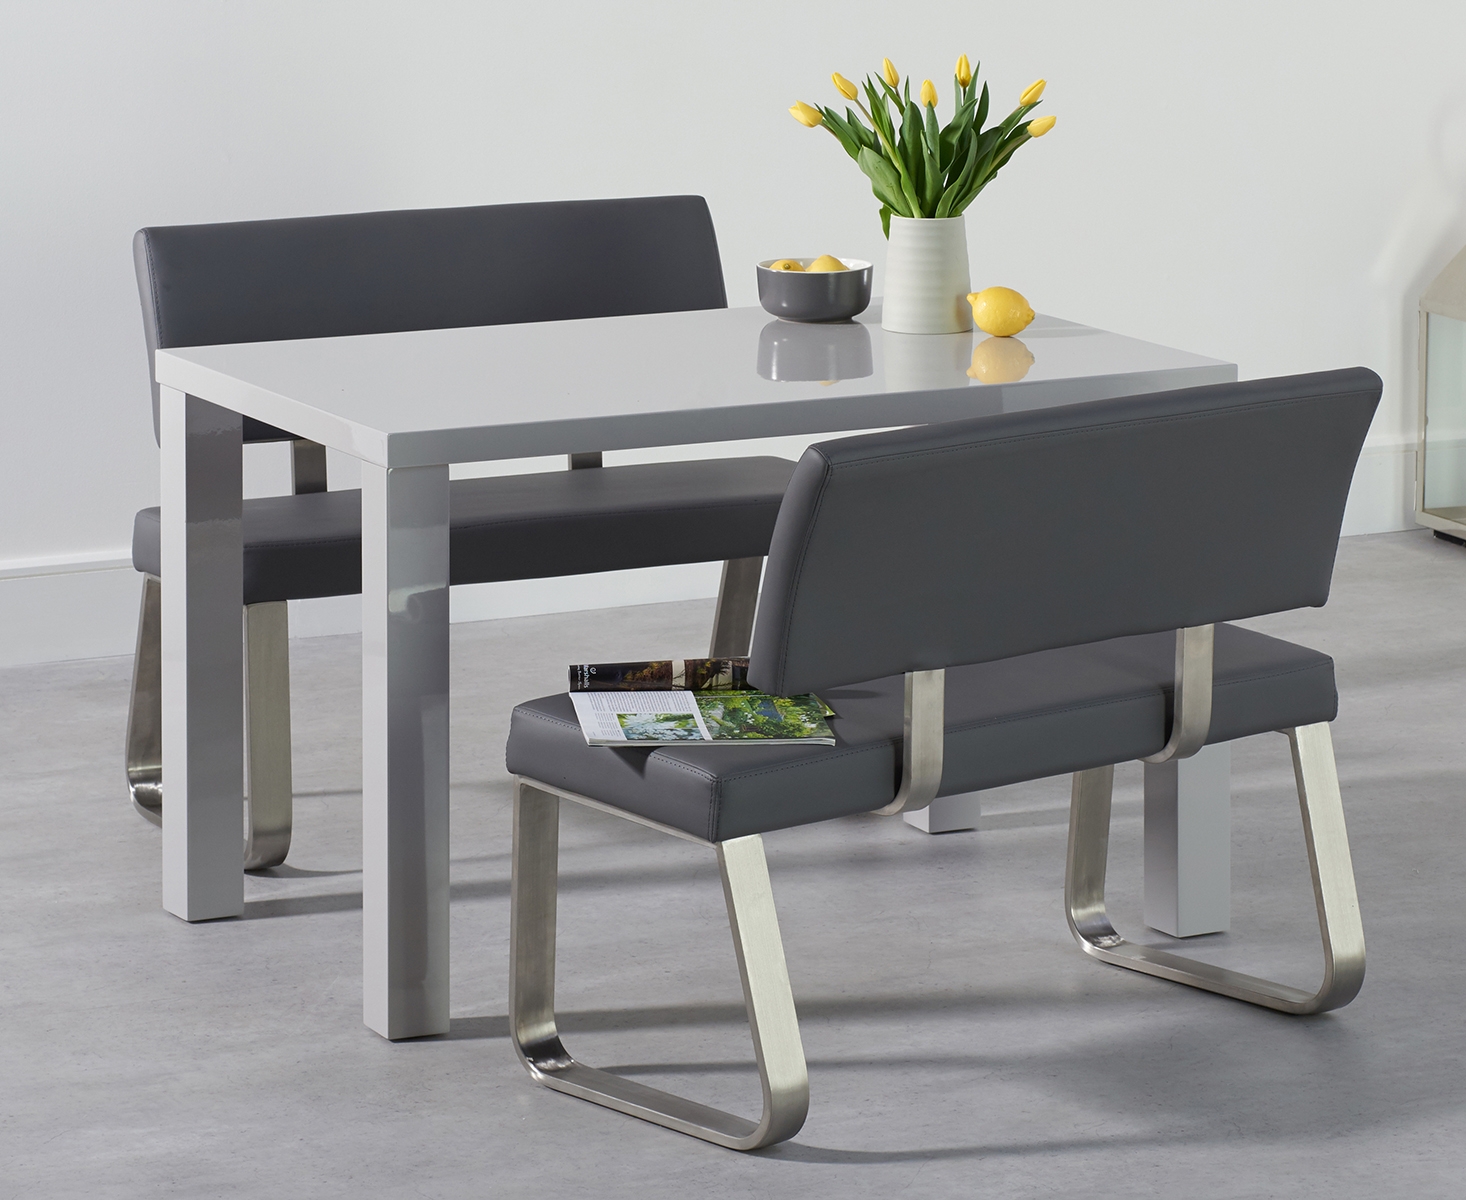 Atlanta 120cm Light Grey High Gloss Dining Table With Austin Benches With Backs